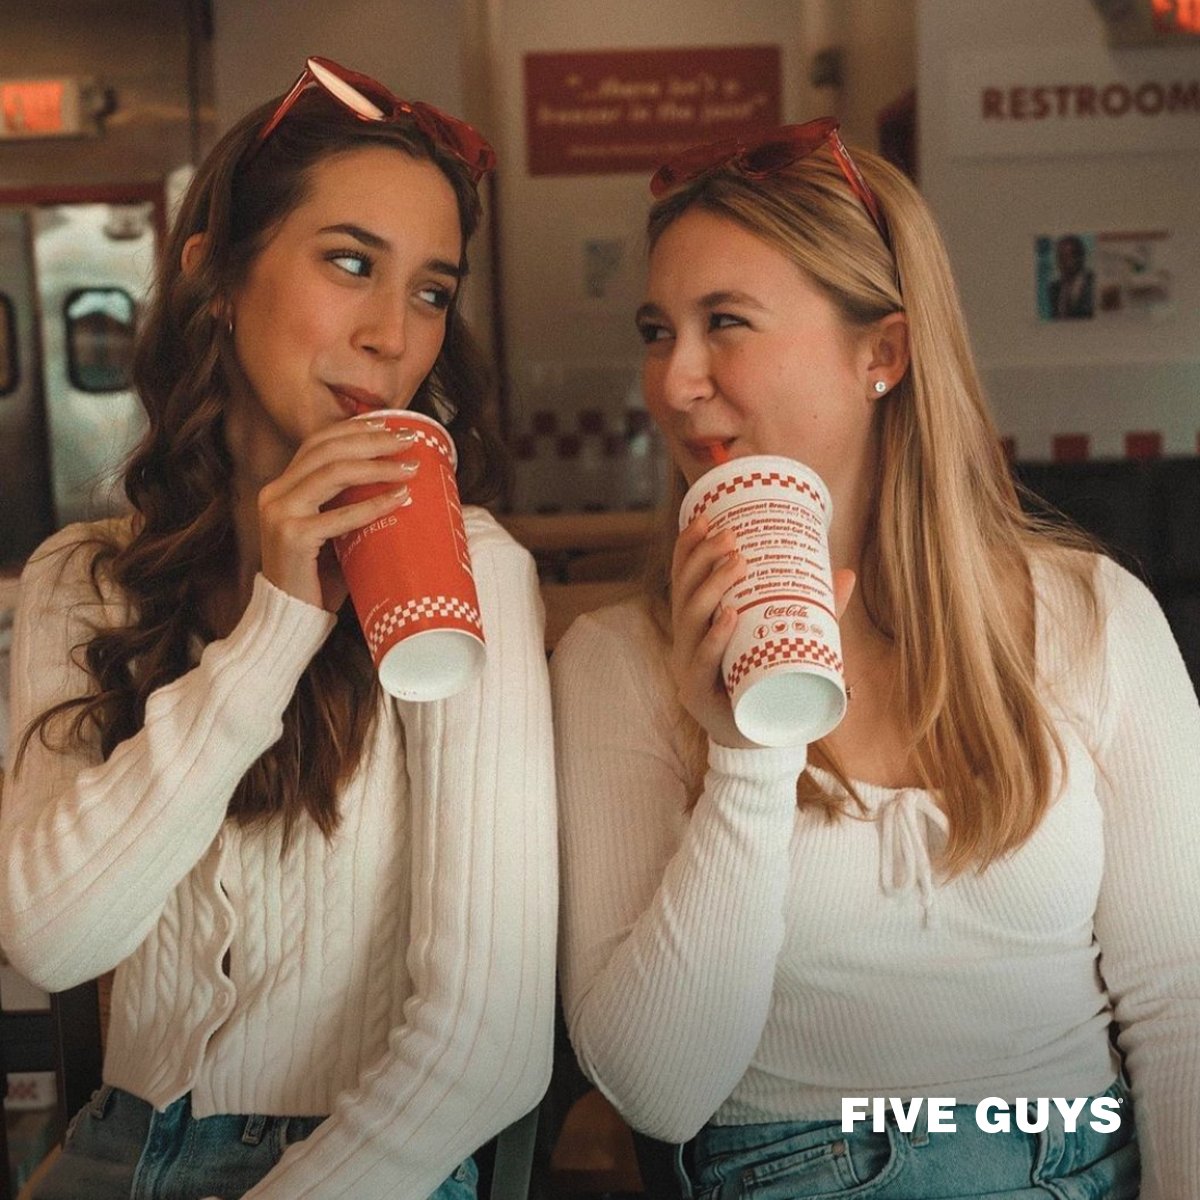 Fridays are for going to Five Guys with your friends! (📸: melindawestphotography | Instagram)